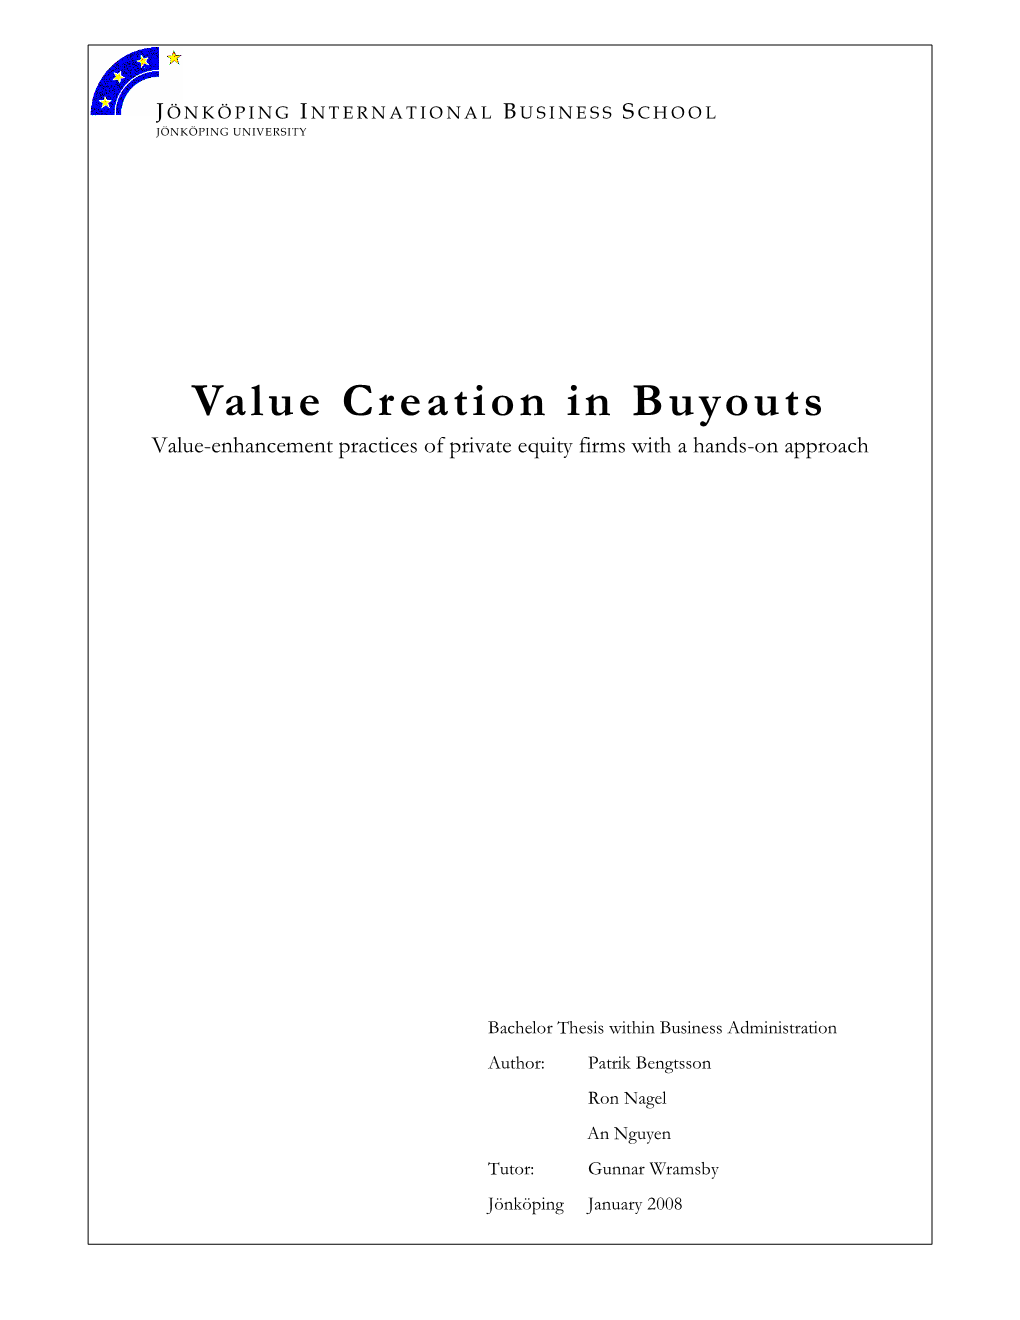 Value Creation in Buyouts Value-Enhancement Practices of Private Equity Firms with a Hands-On Approach